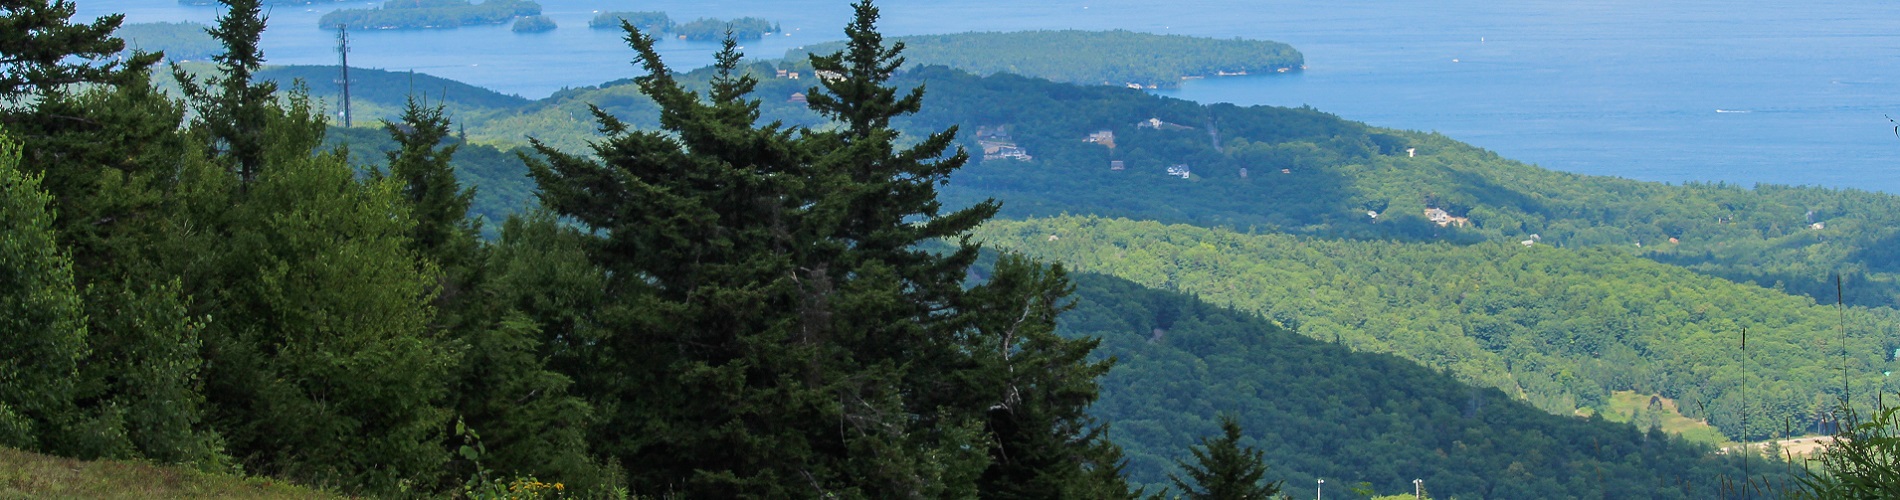 Gunstock Mountain Brew and BBQ banner image